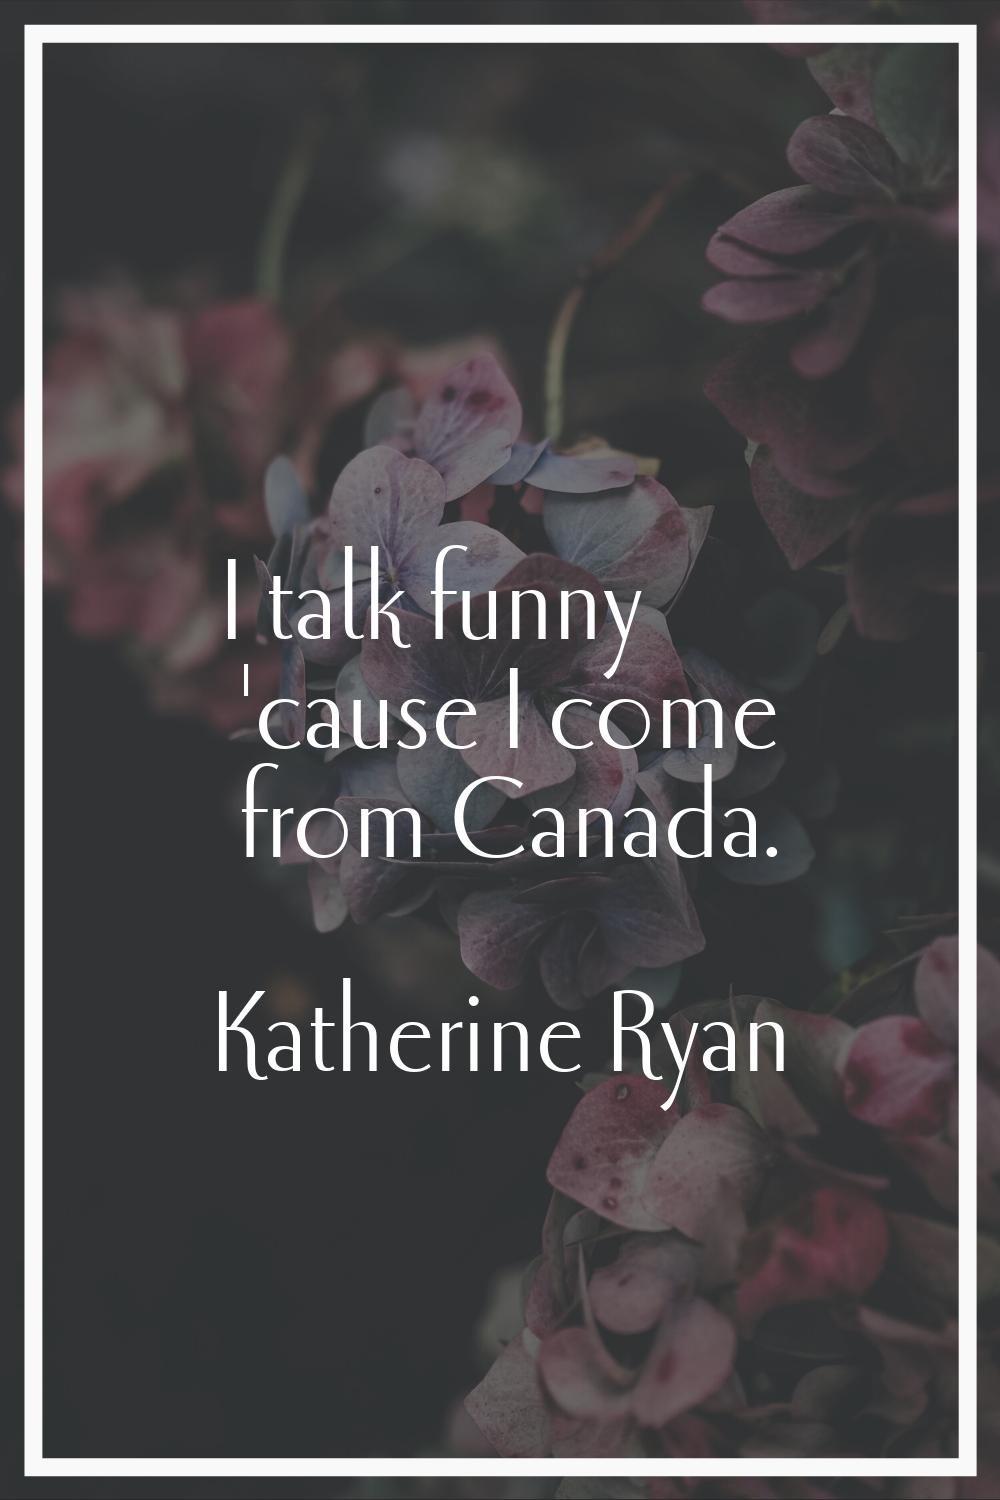 I talk funny 'cause I come from Canada.